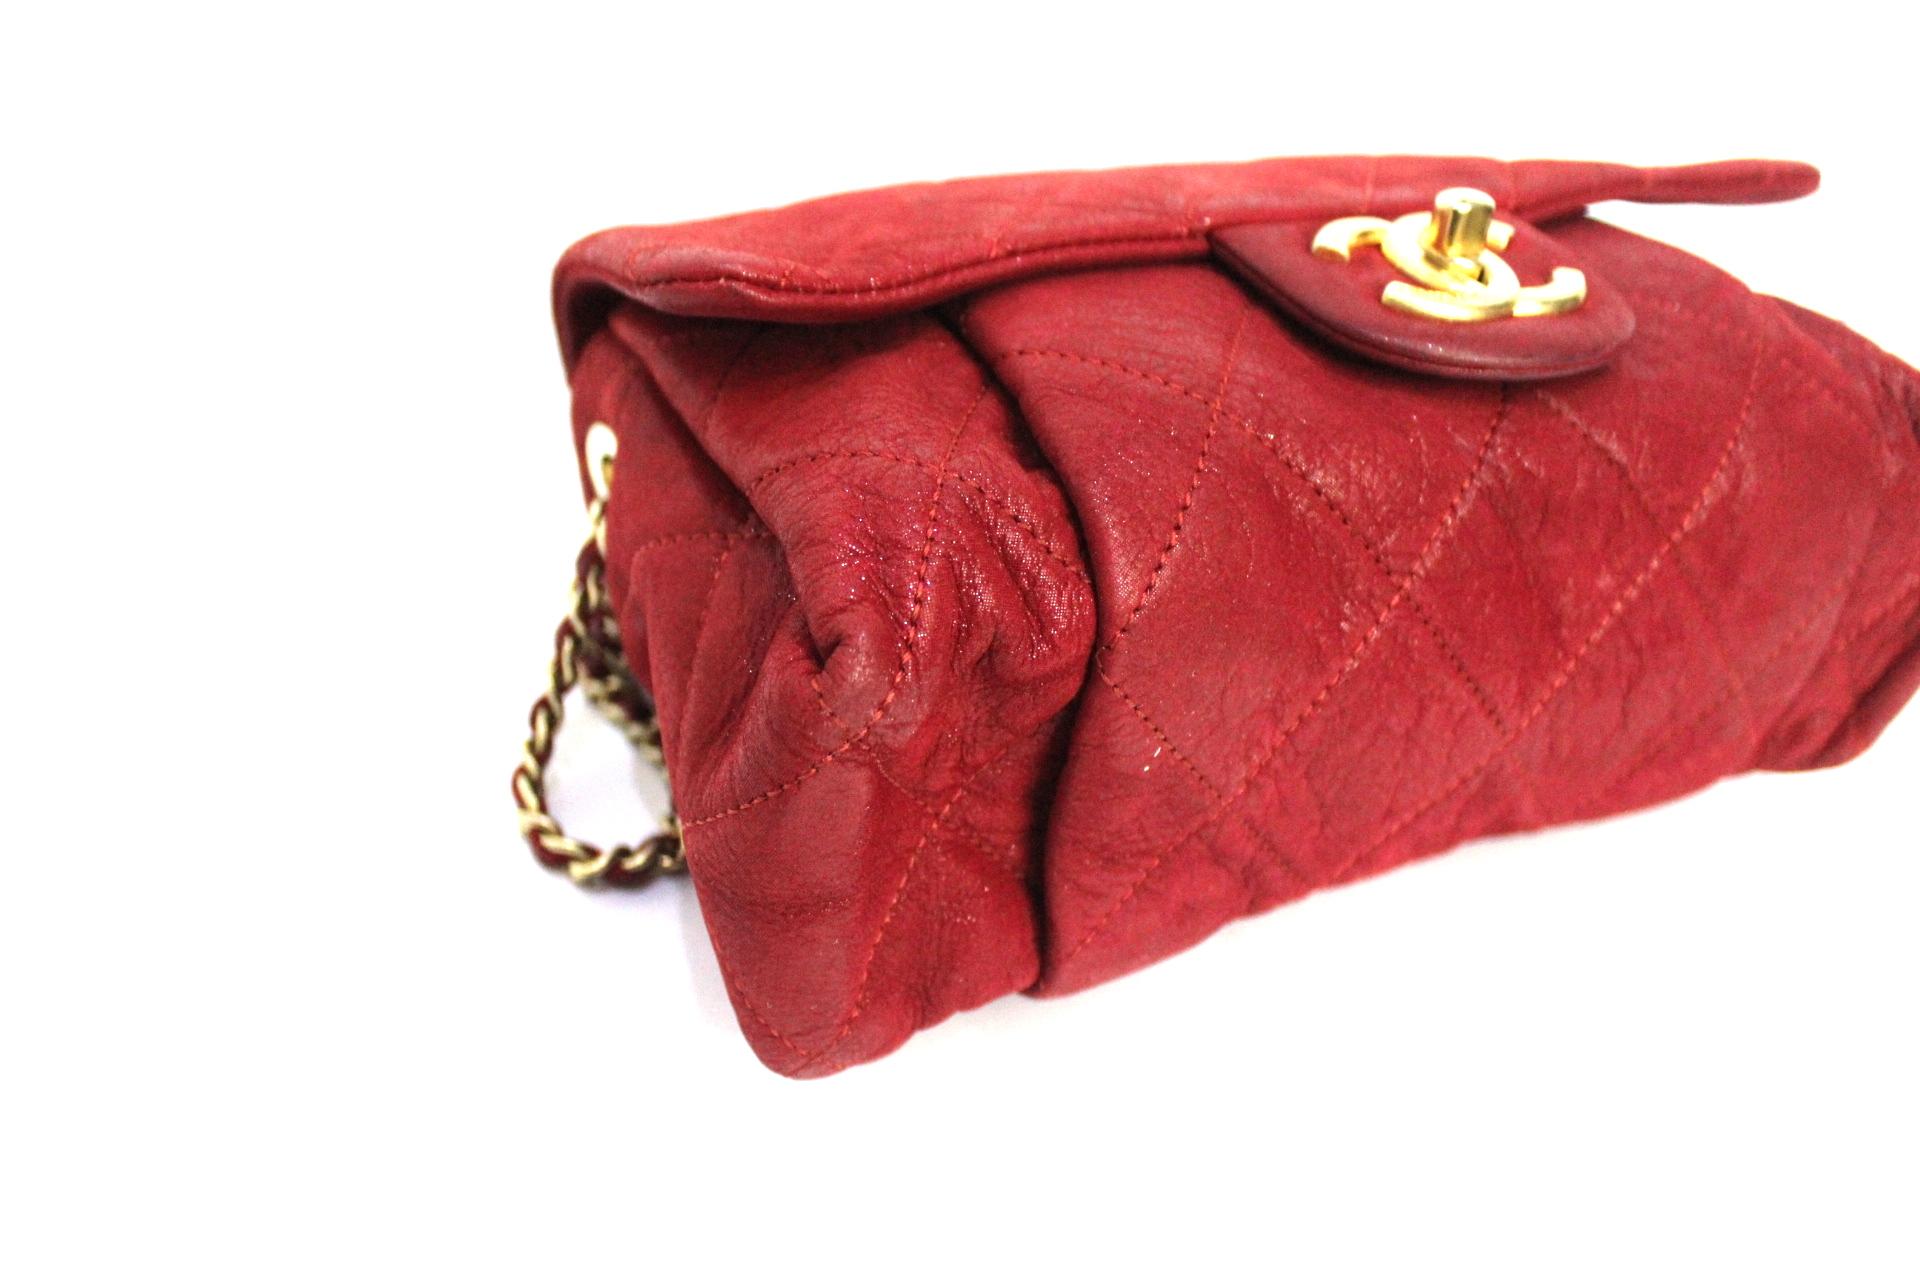 Women's Chanel Red Leather Bag